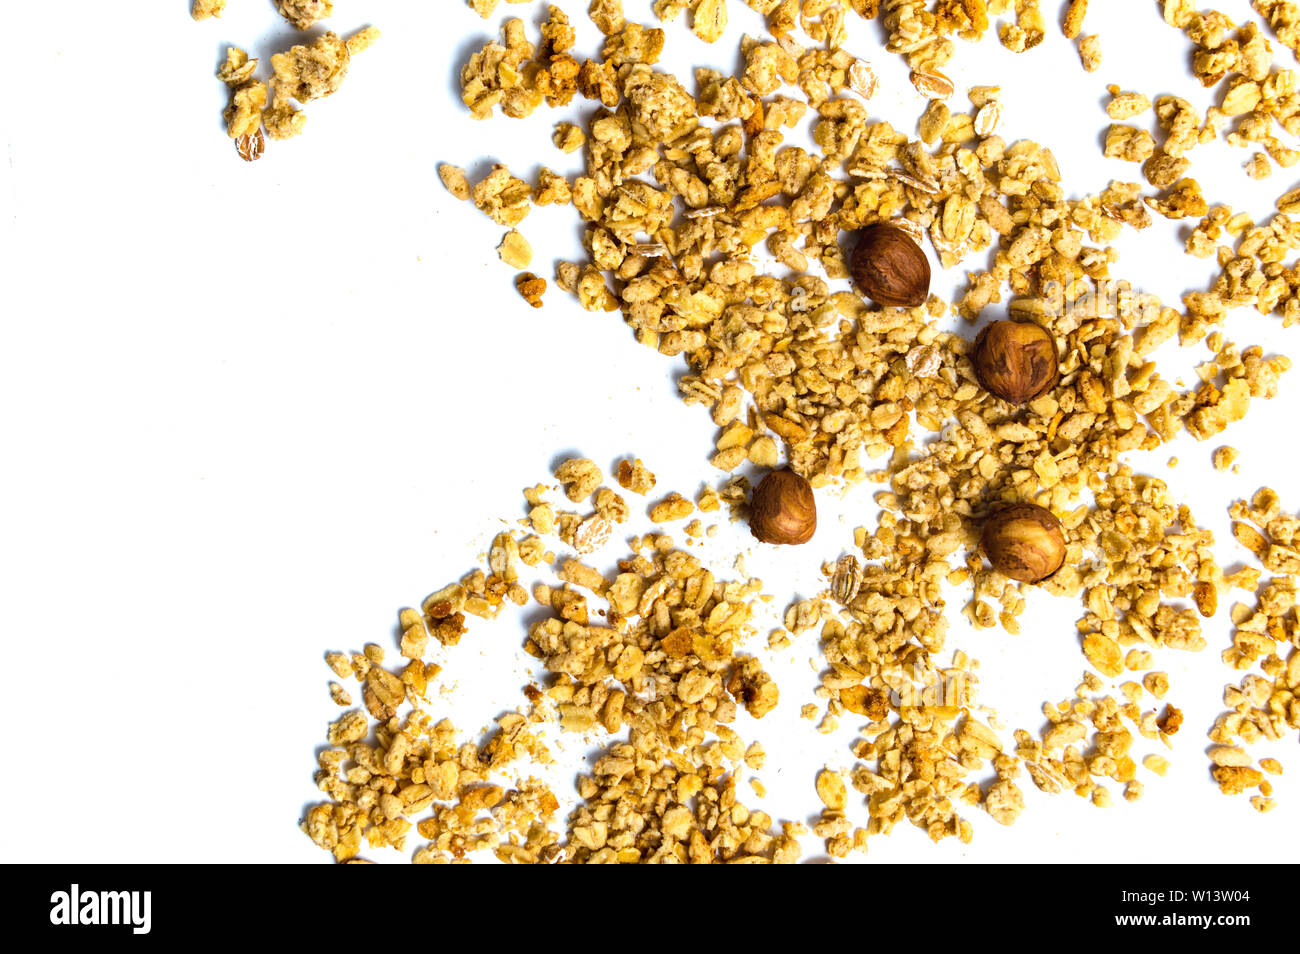 Various cereals and granola mix with hazelnuts top view Stock Photo